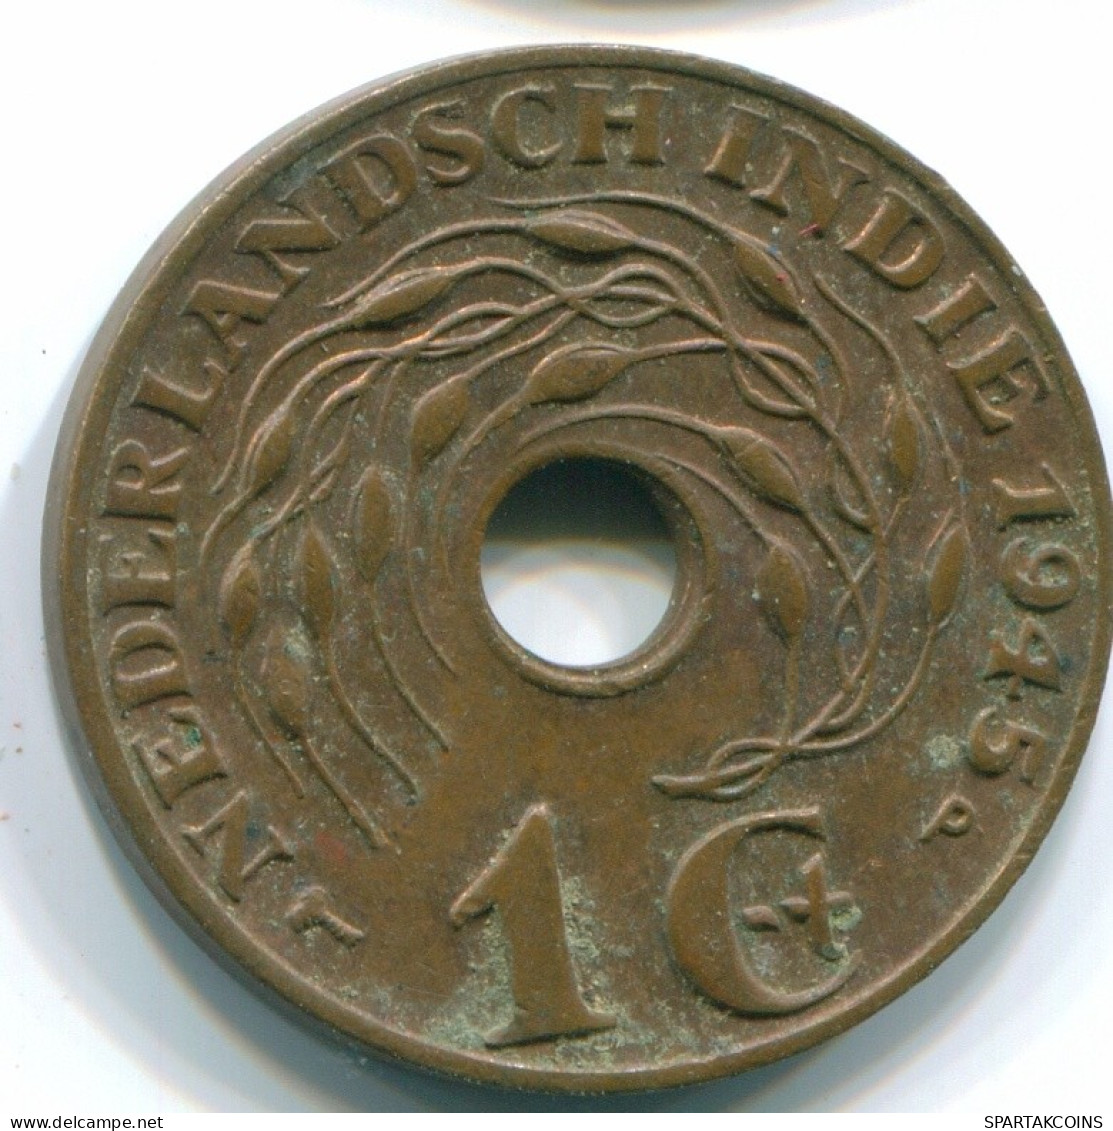 1 CENT 1945 P NETHERLANDS EAST INDIES INDONESIA Bronze Colonial Coin #S10343.U.A - Dutch East Indies